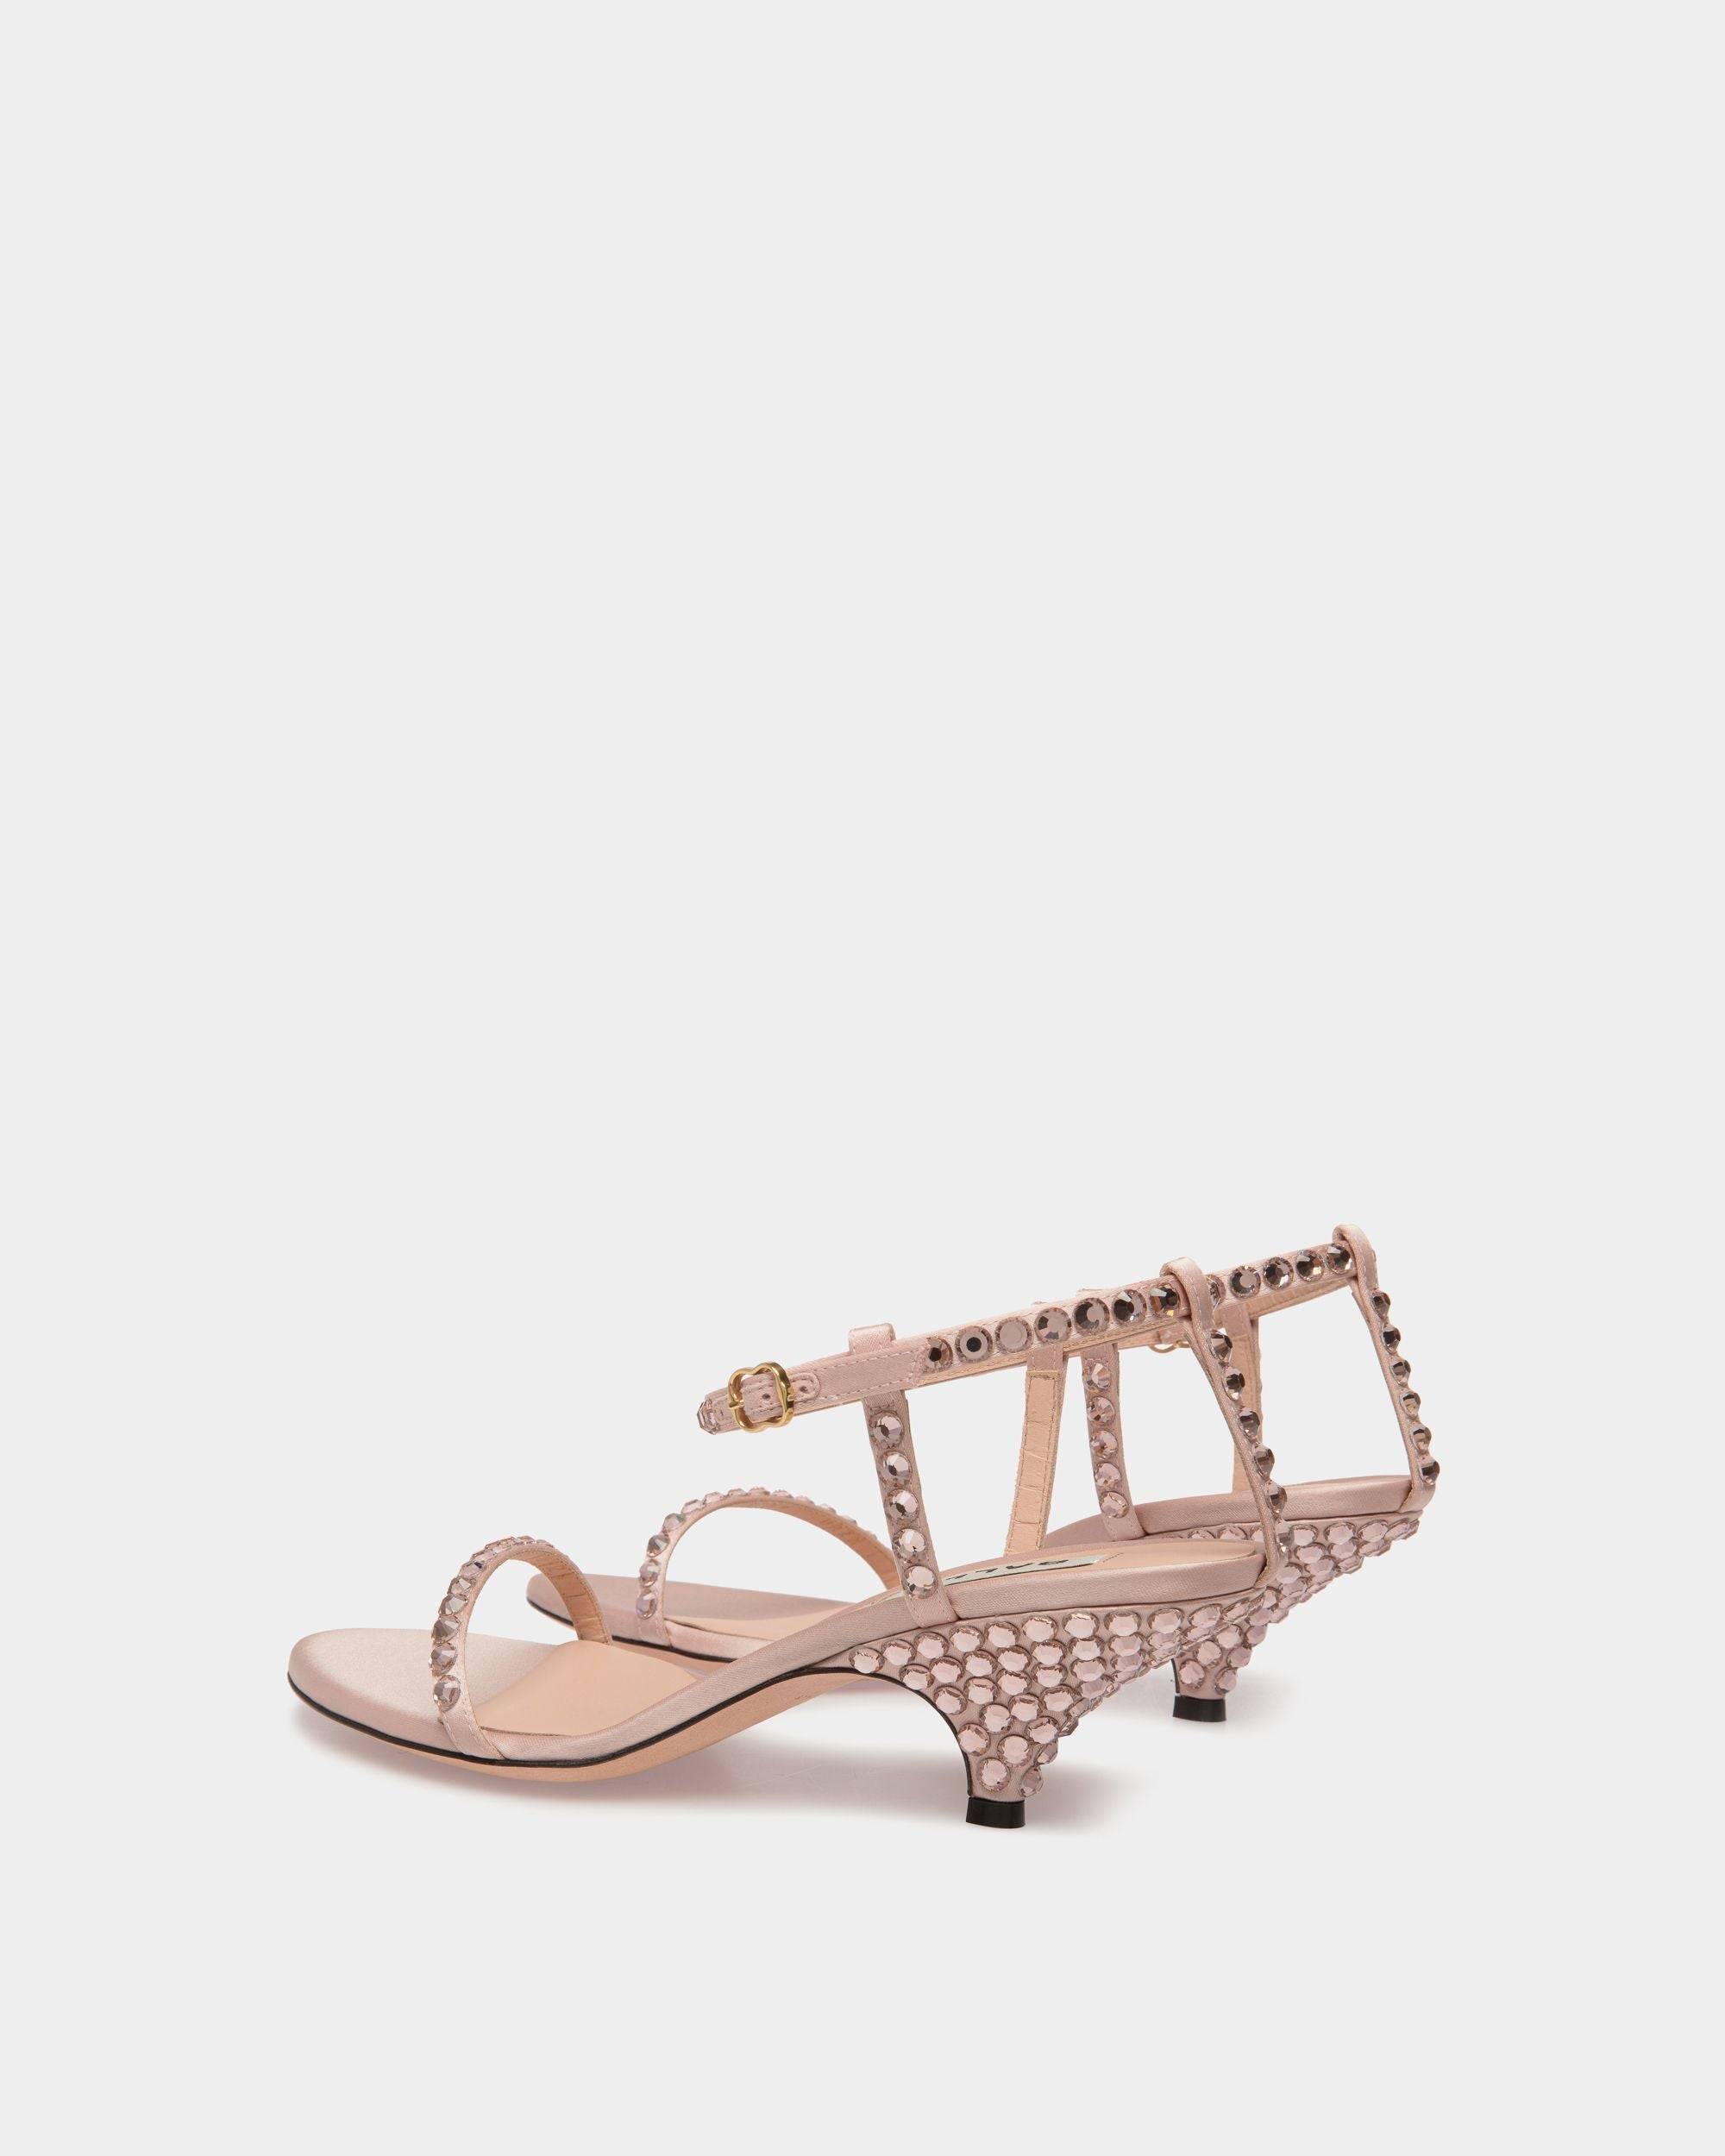 Katy | Women's Heeled Sandal in Light Pink Fabric with Crystals | Bally | Still Life 3/4 Back